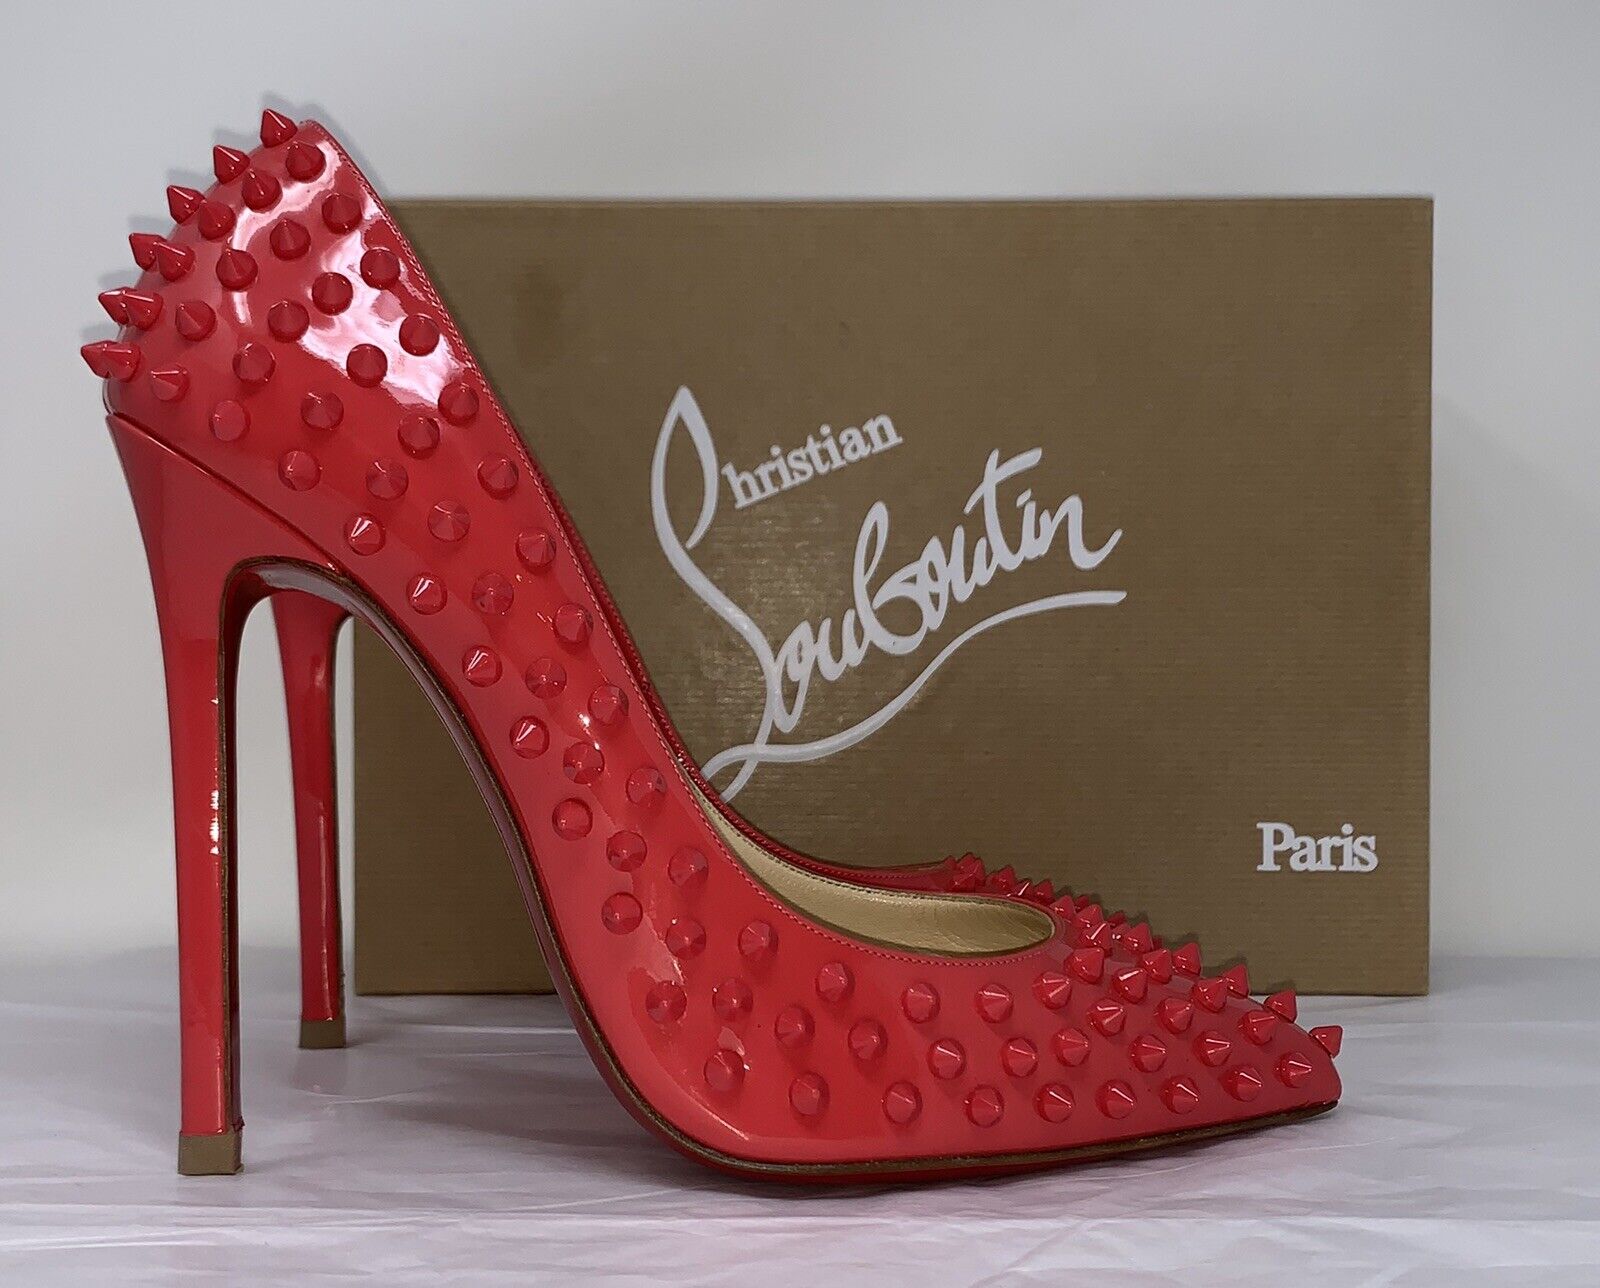 CHRISTIAN LOUBOUTIN Heels Patent Spikes Pigalle 120 Pumps 40.5 Pink  AUTHENTIC